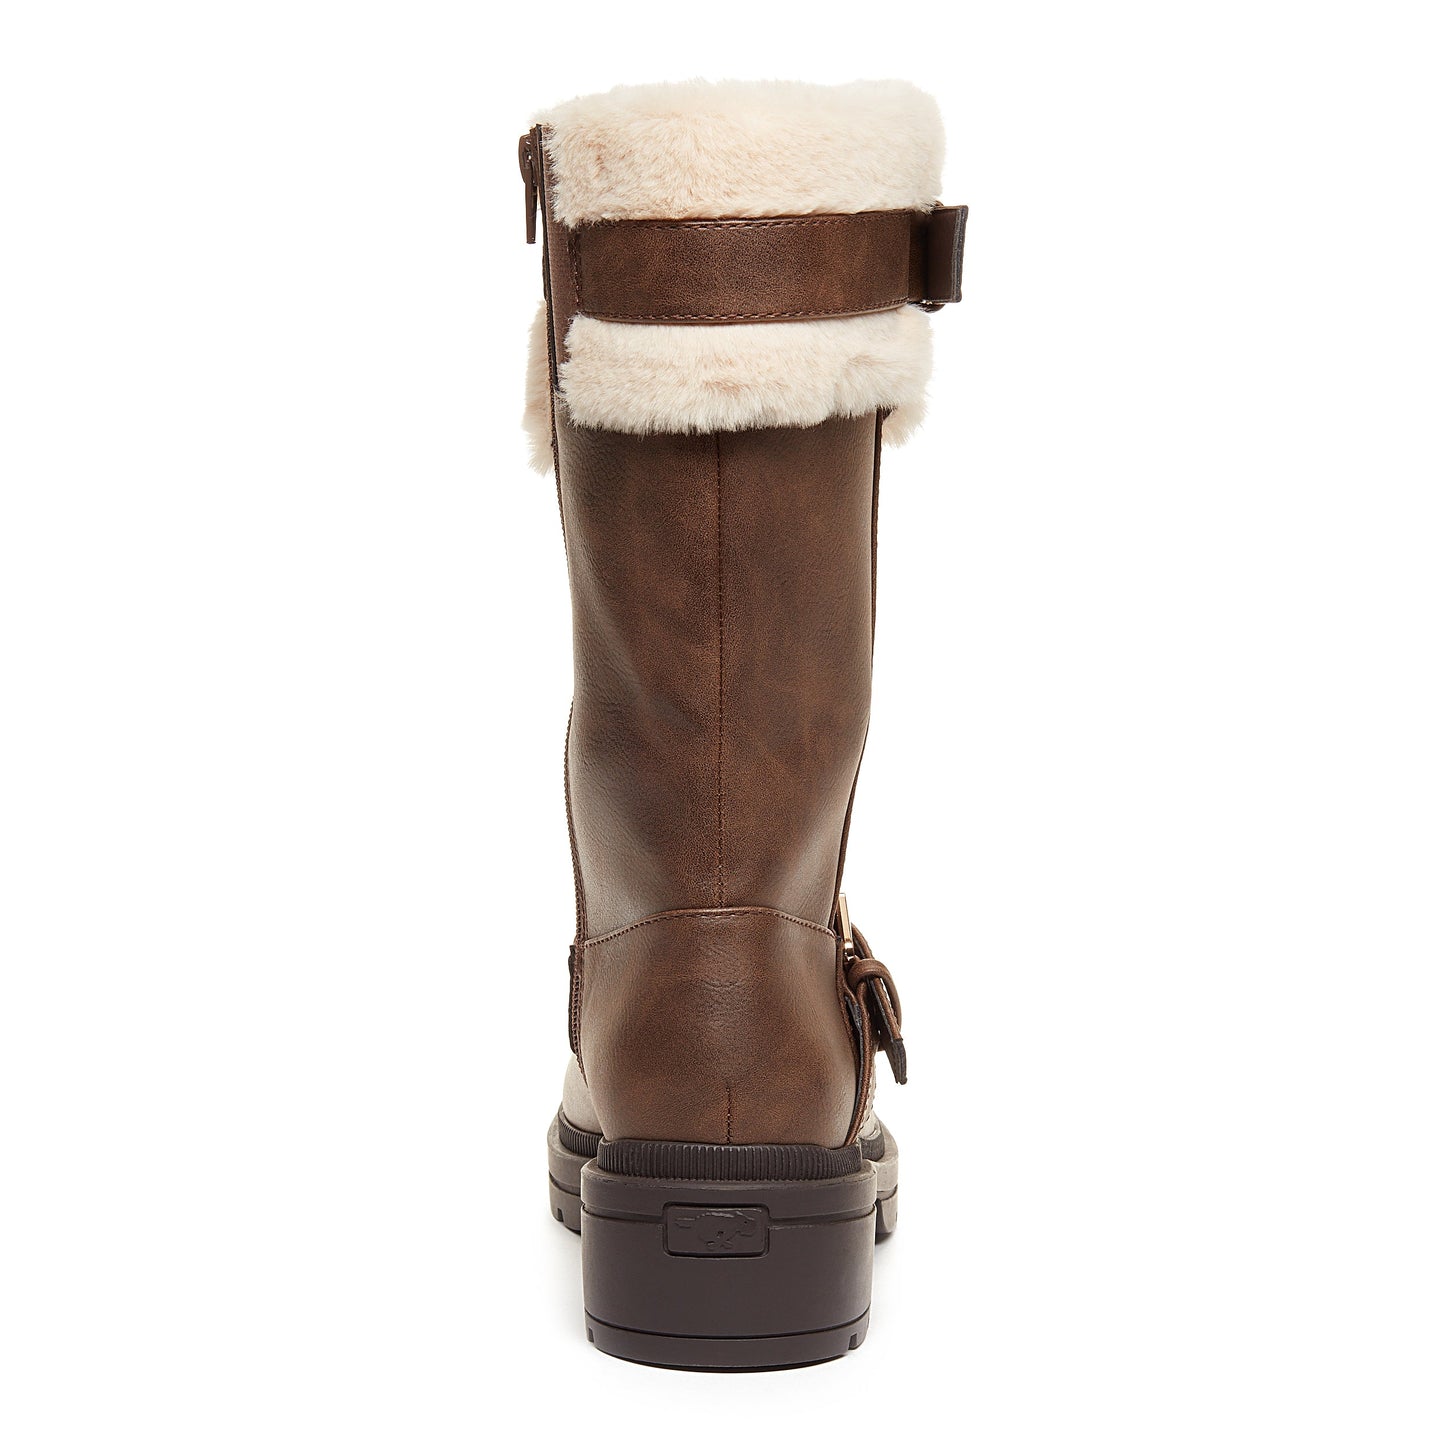 Igloo Brown Buckled Tall Winter Boot